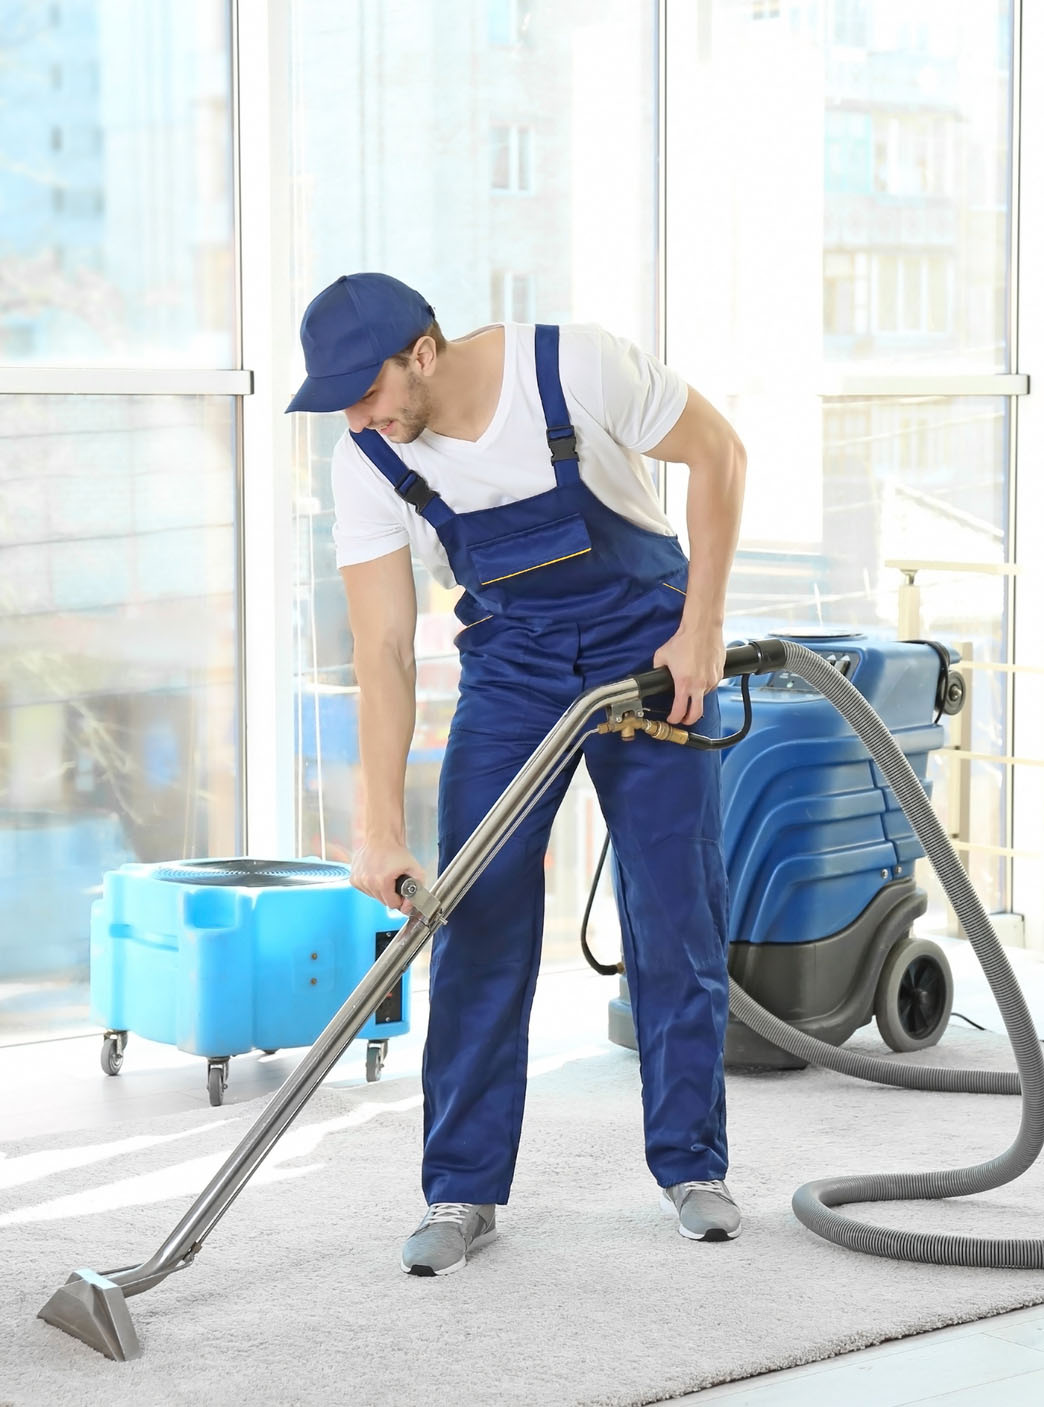 Carpet Cleaning 1